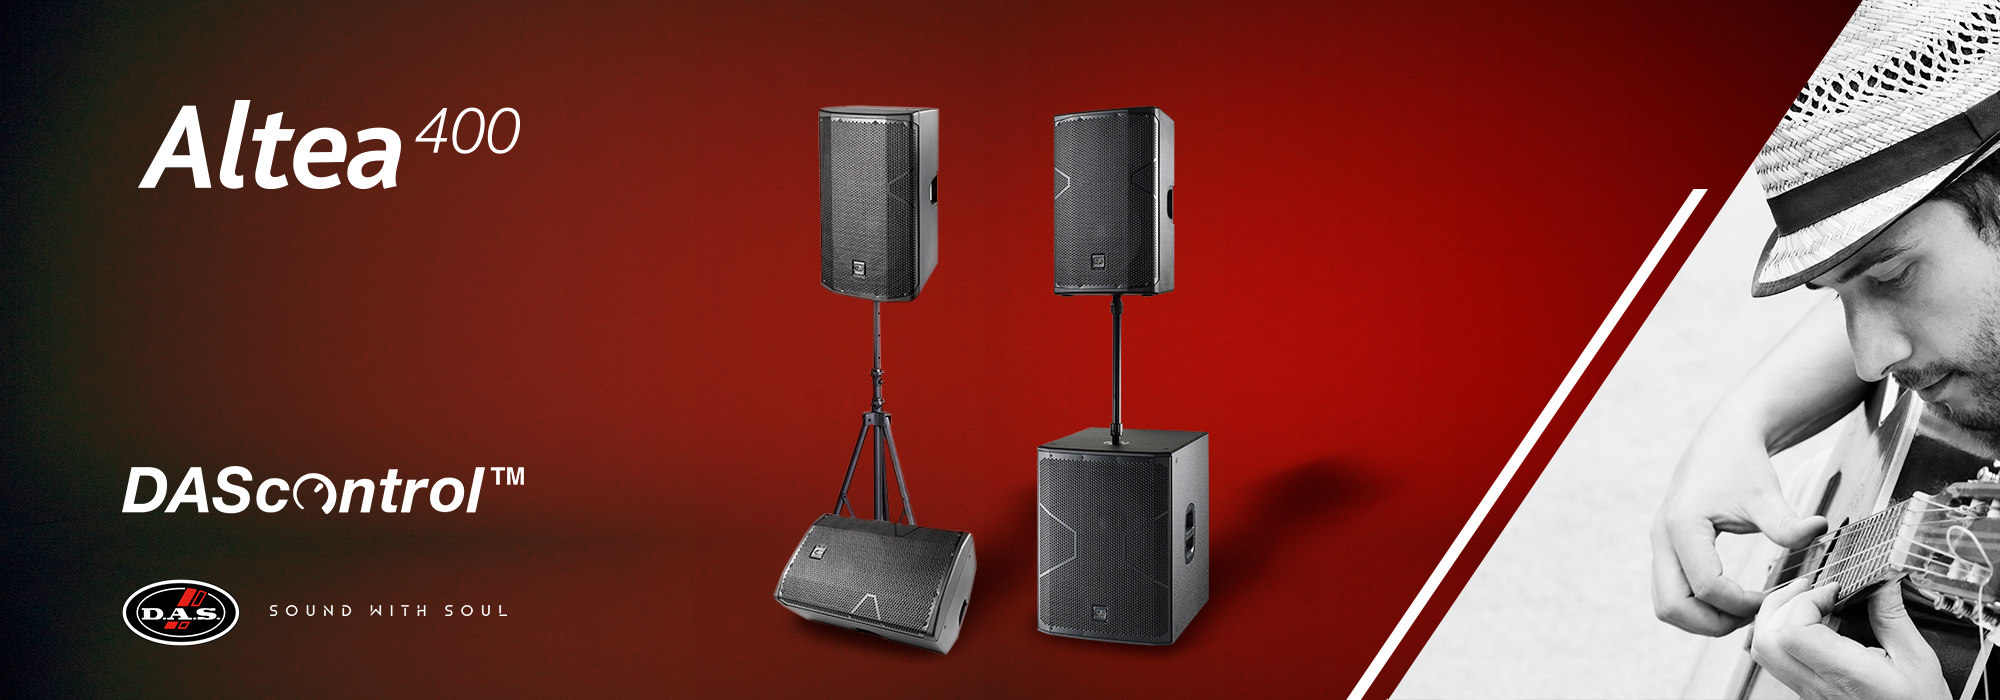 DAS AUDIO offers performance, reliability and unparalleled convenience | Consbud Audio